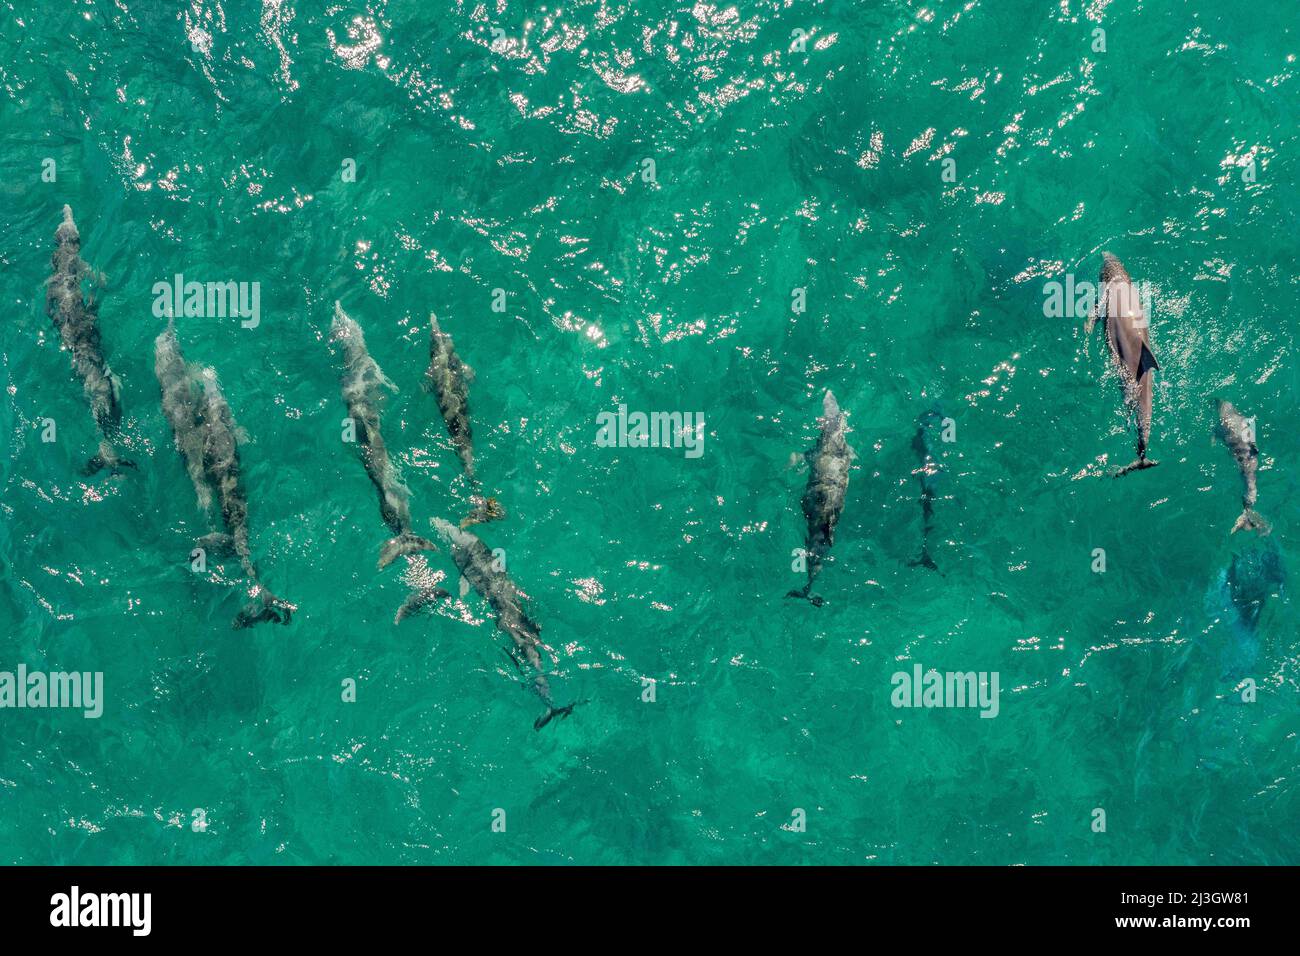 France, Lesser Antilles, French West Indies, Saint-Martin, National Nature Reserve, Tintamarre Island, group of Bottlenose or Bottlenose Dolphins or Bottlenose Dolphins or Tursiops (Tursiops truncatus) (aerial view) Stock Photo